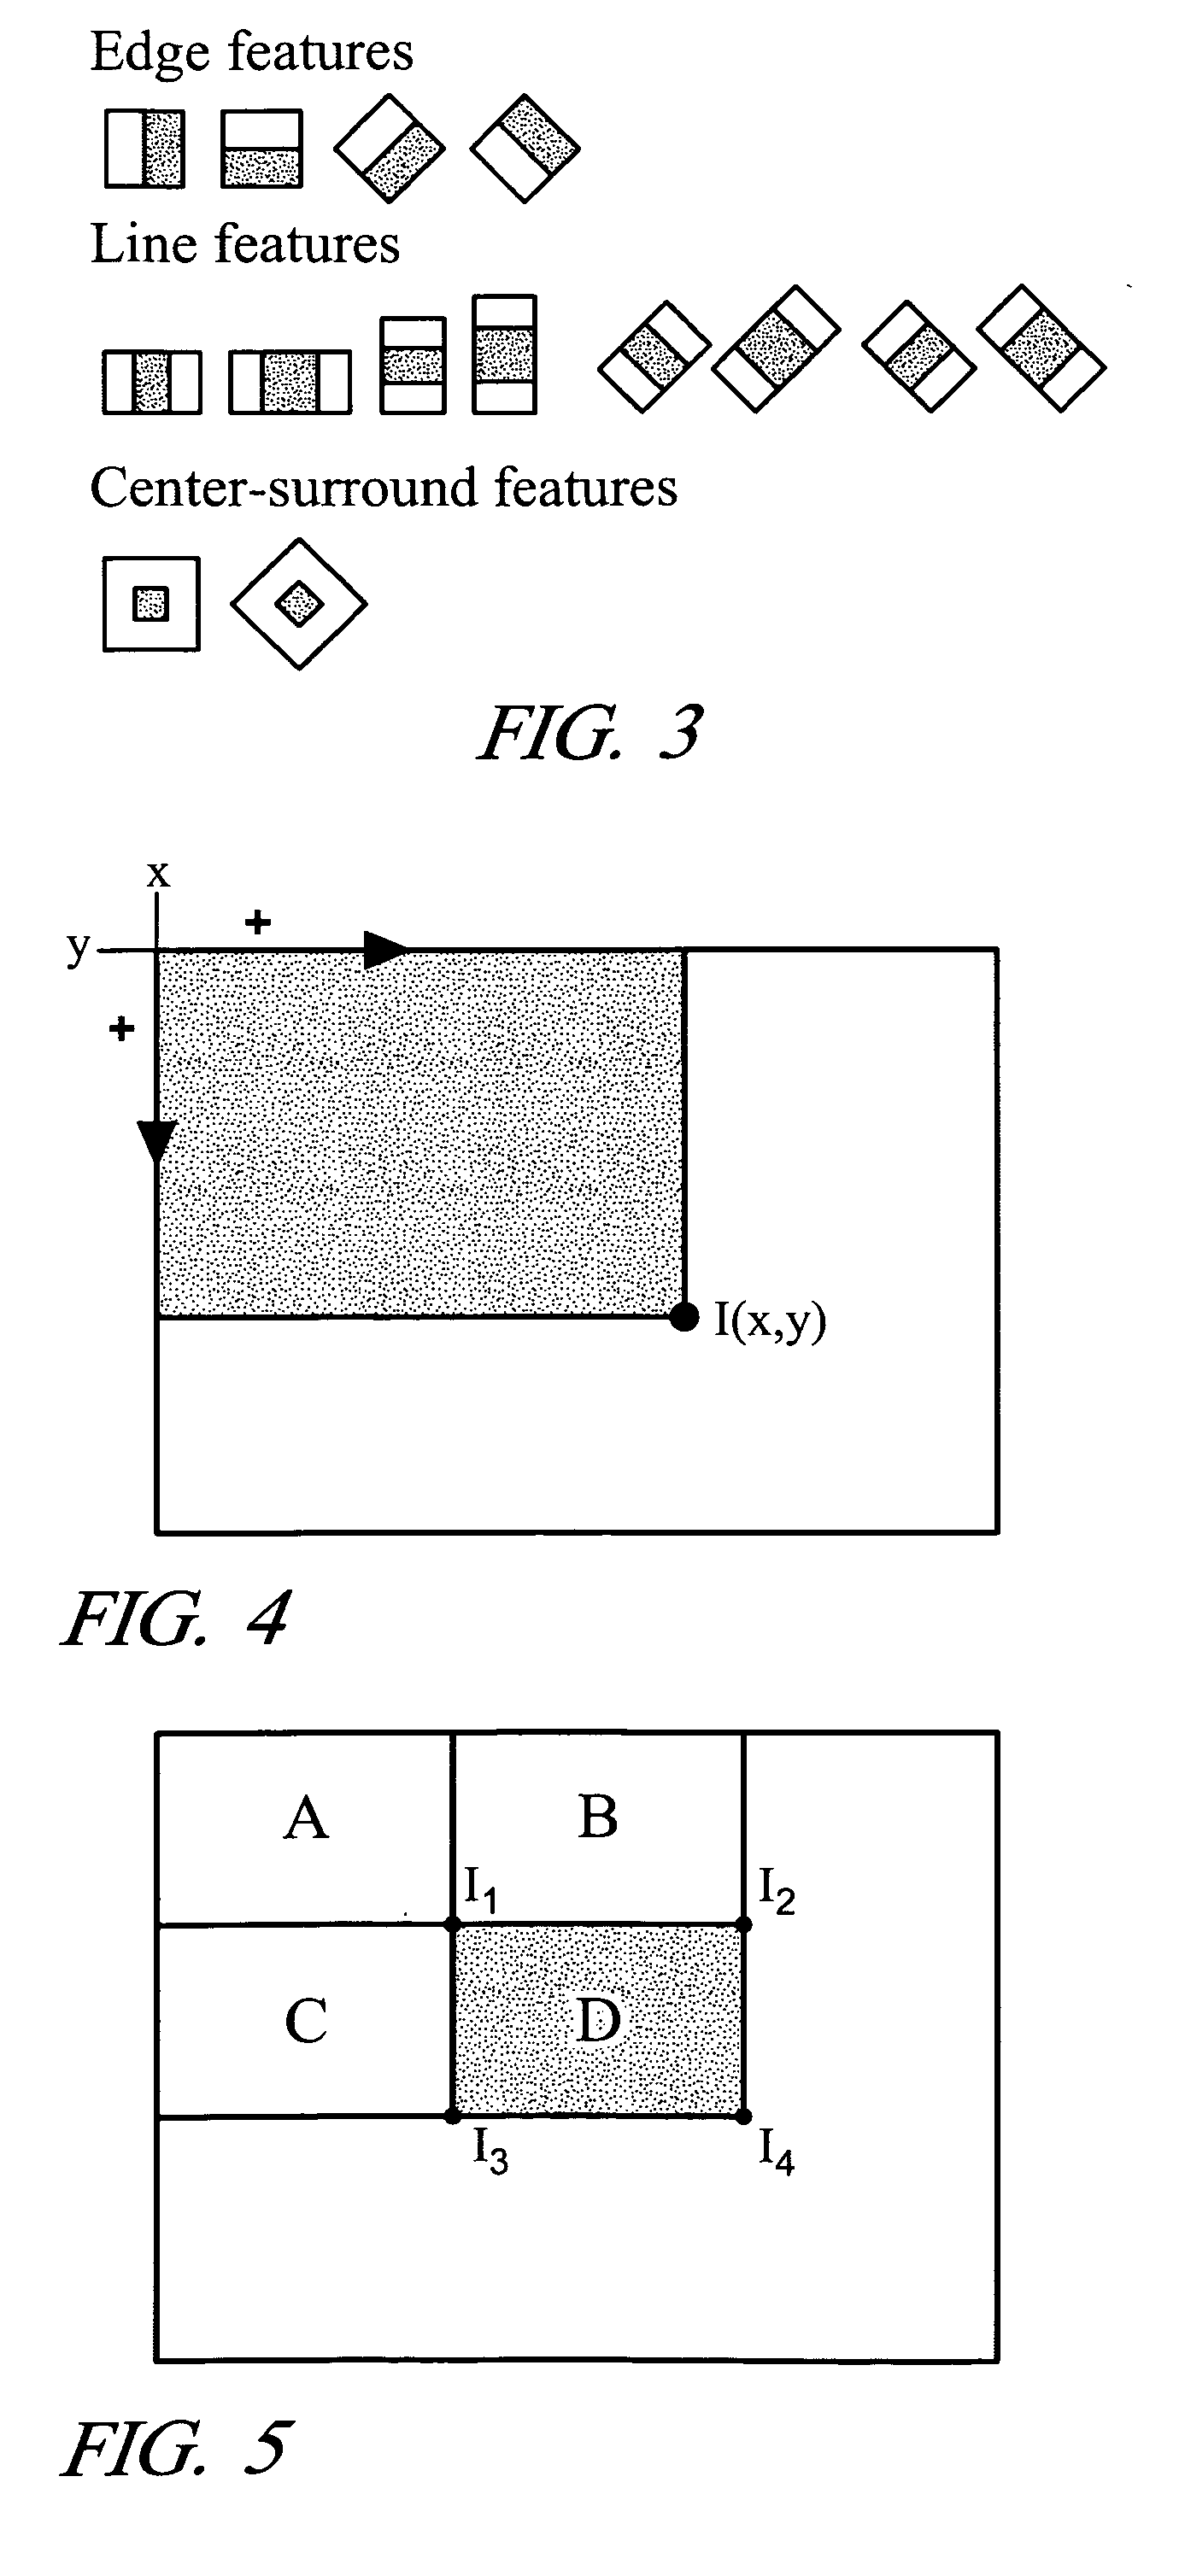 Method for warped image object recognition